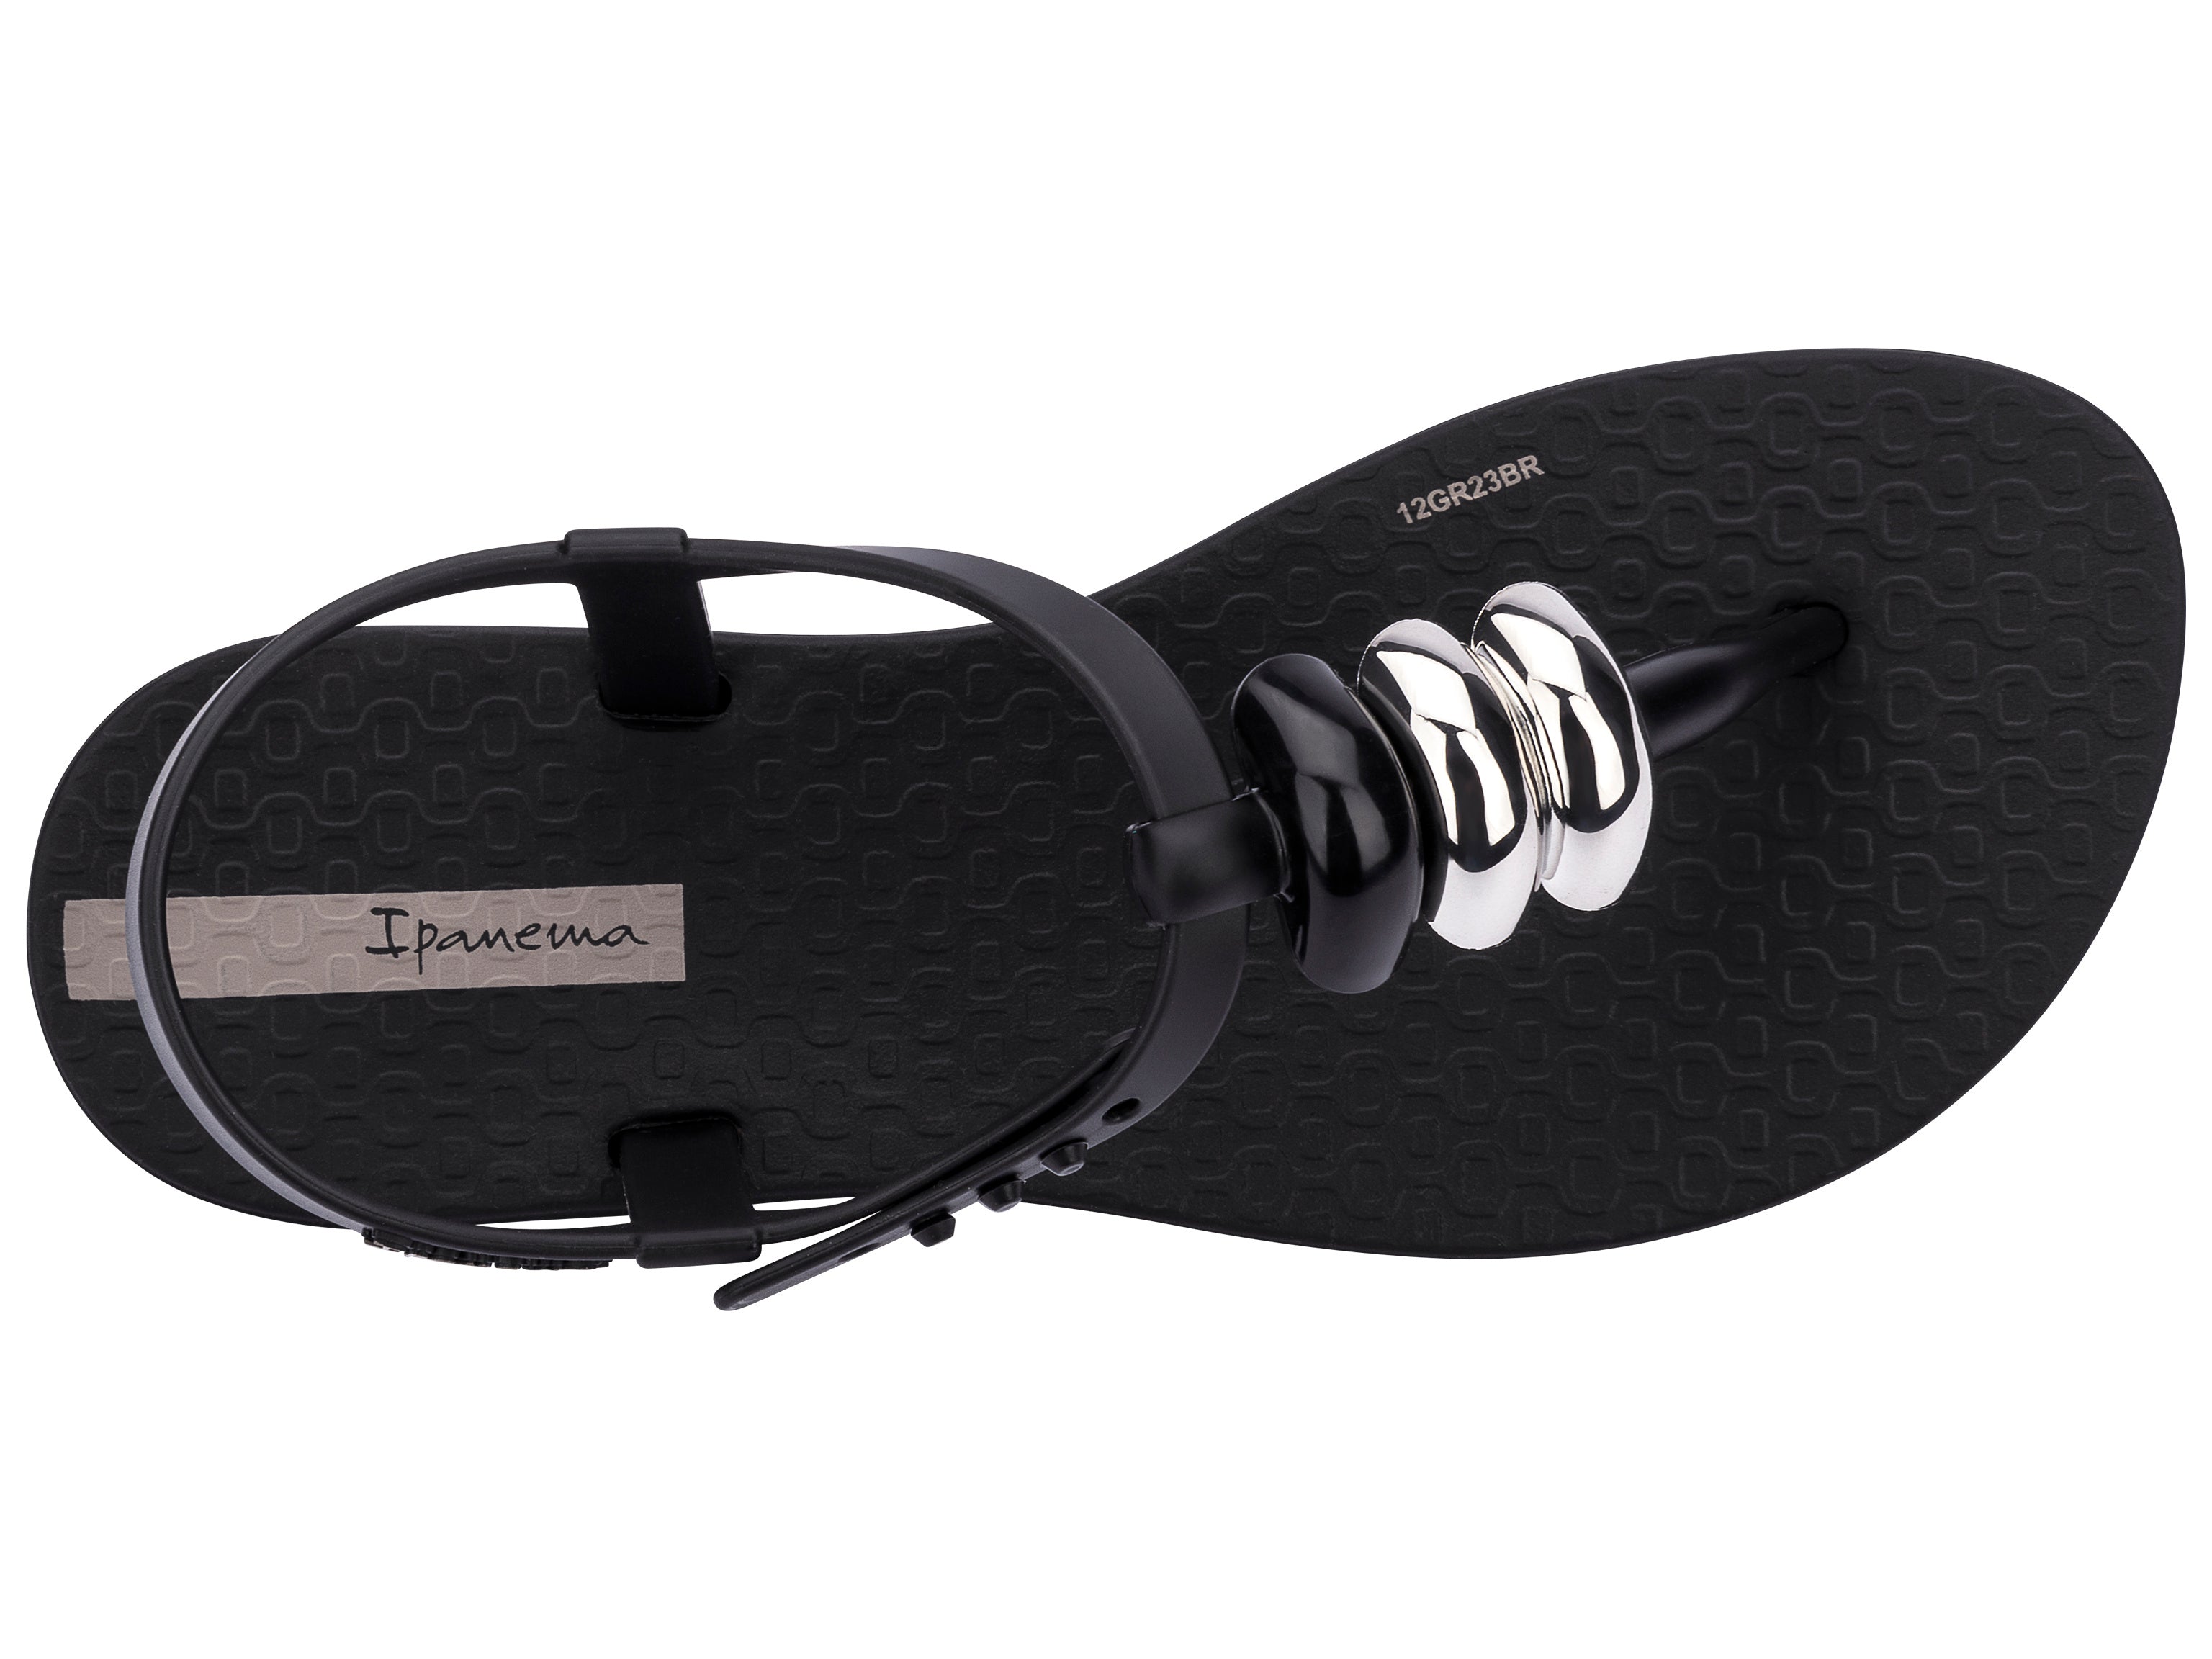 Top view of a black Ipanema Class kids' t-strap sandal with 3 baubles on the strap.